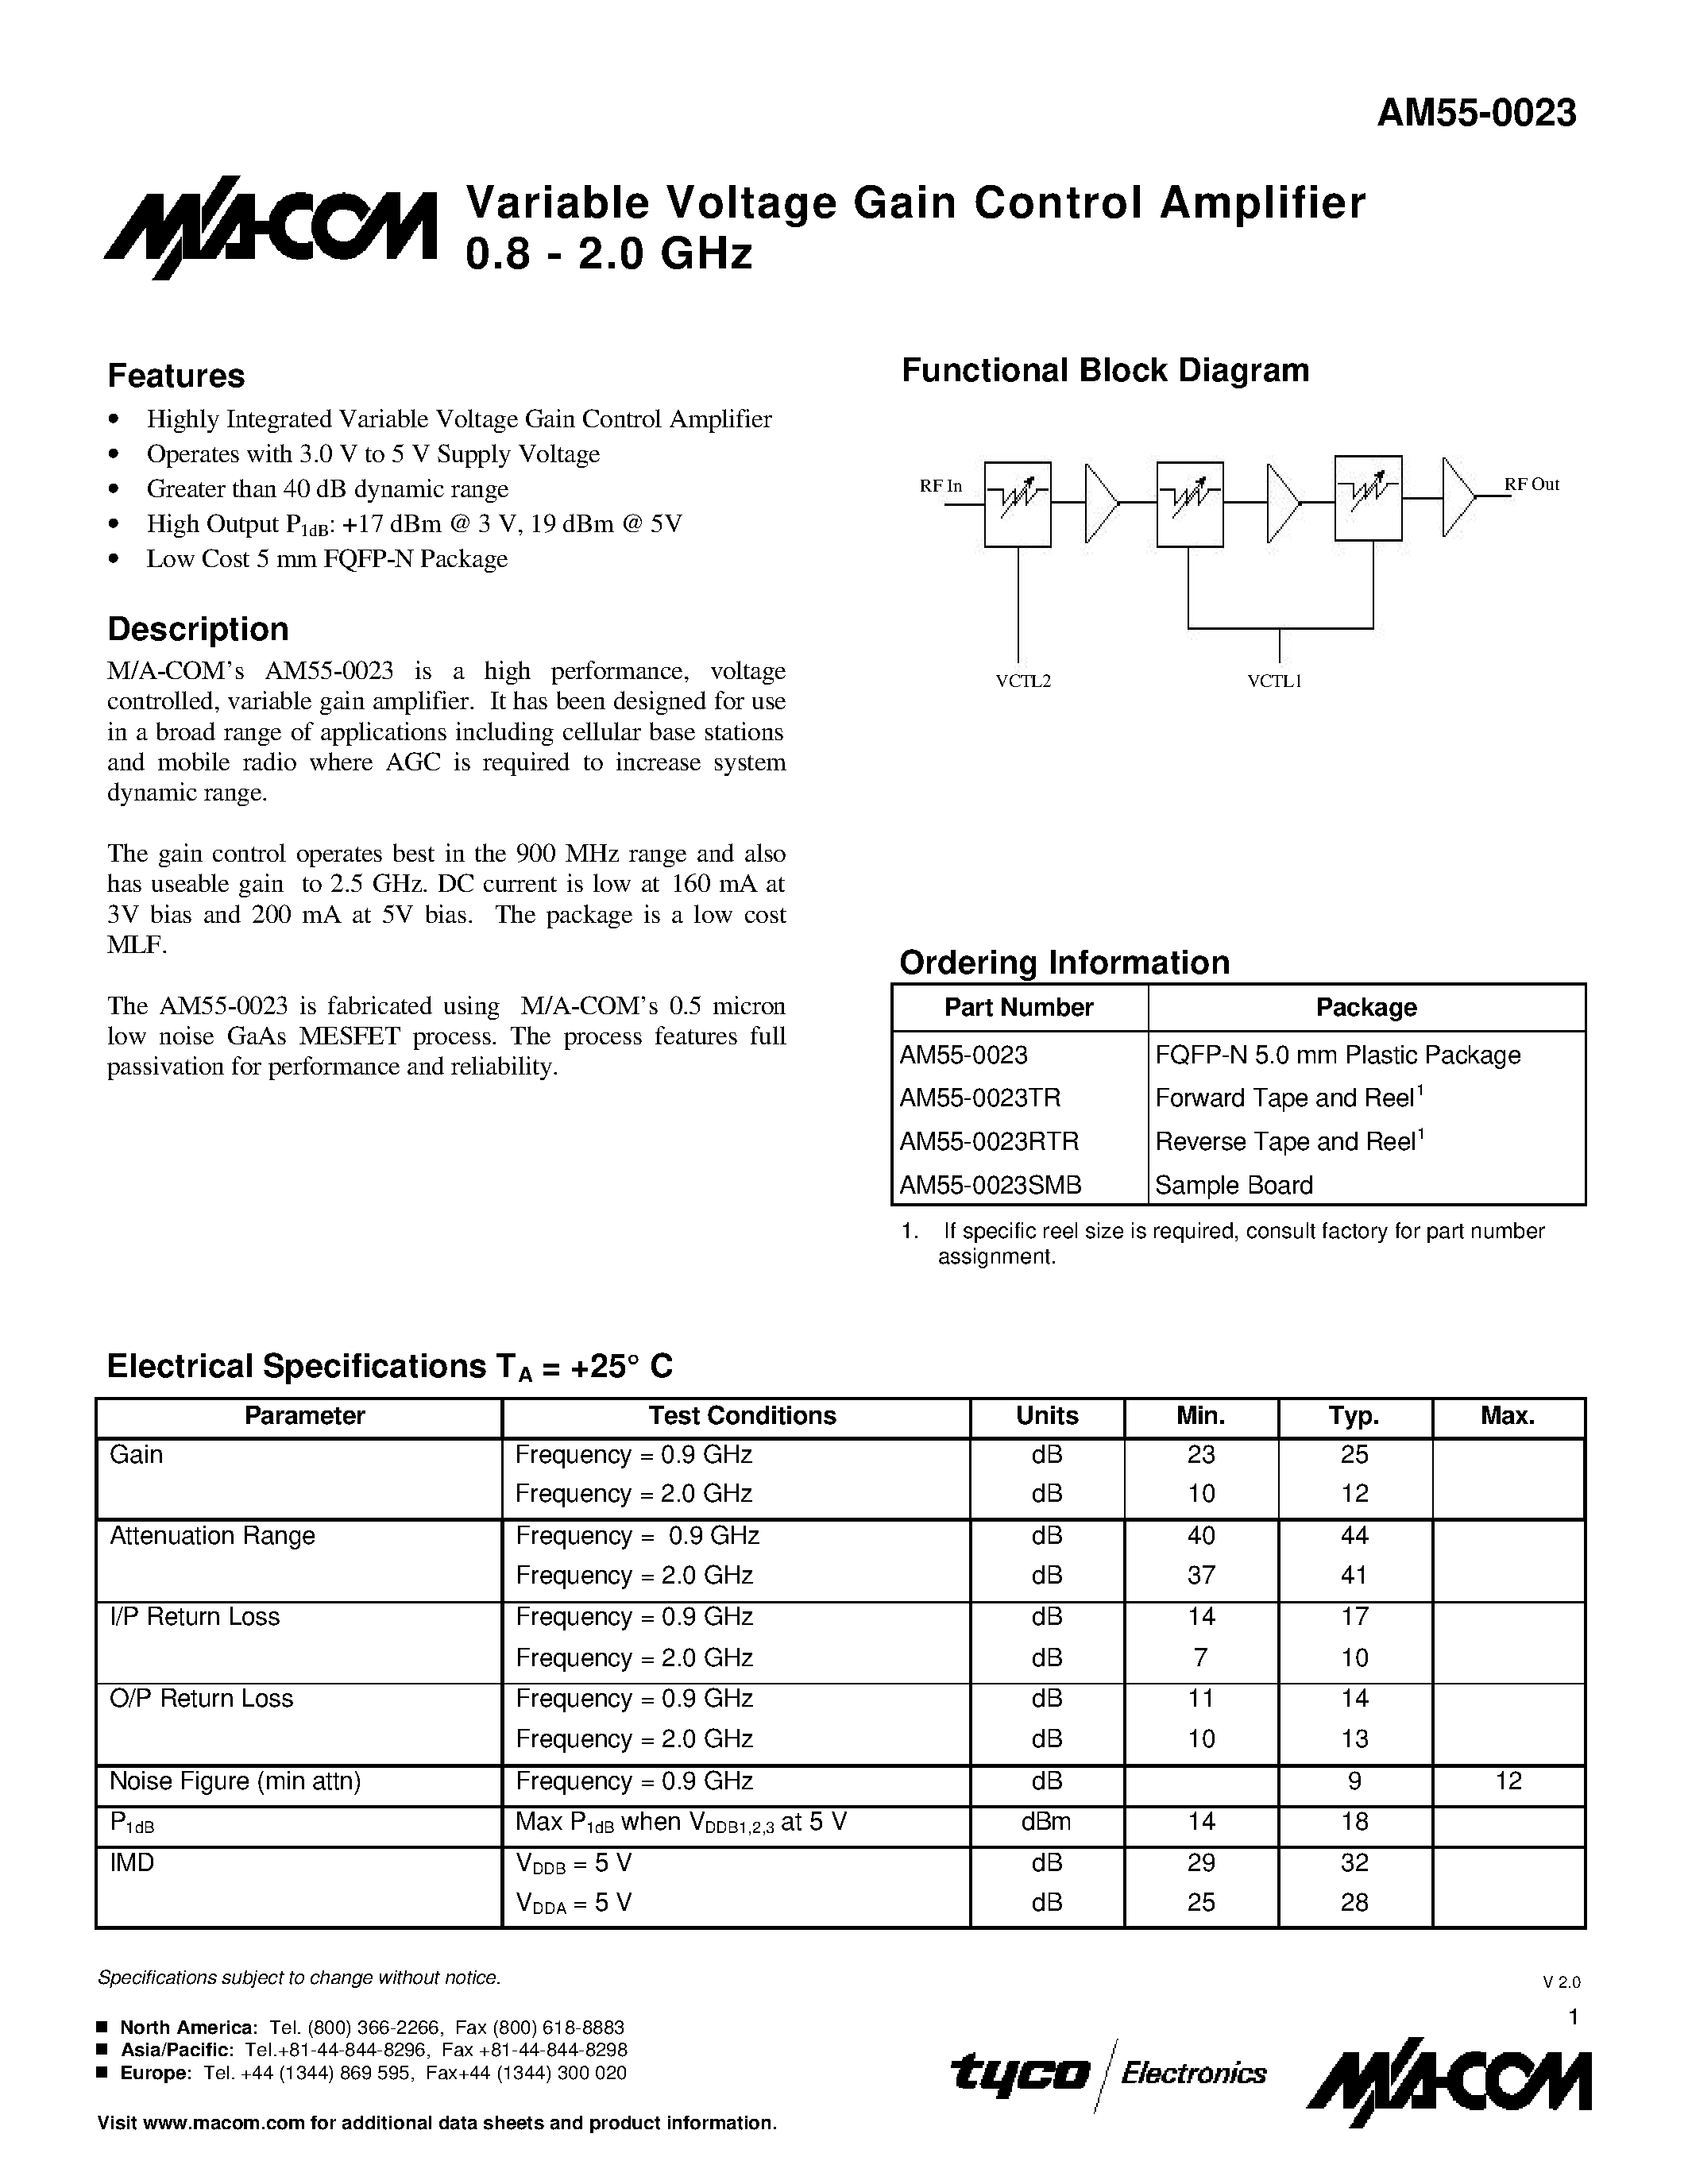 Datasheet AM55-0023SMB - Variable Voltage Gain Control Amplifier 0.8 - 2.0 GHz page 1